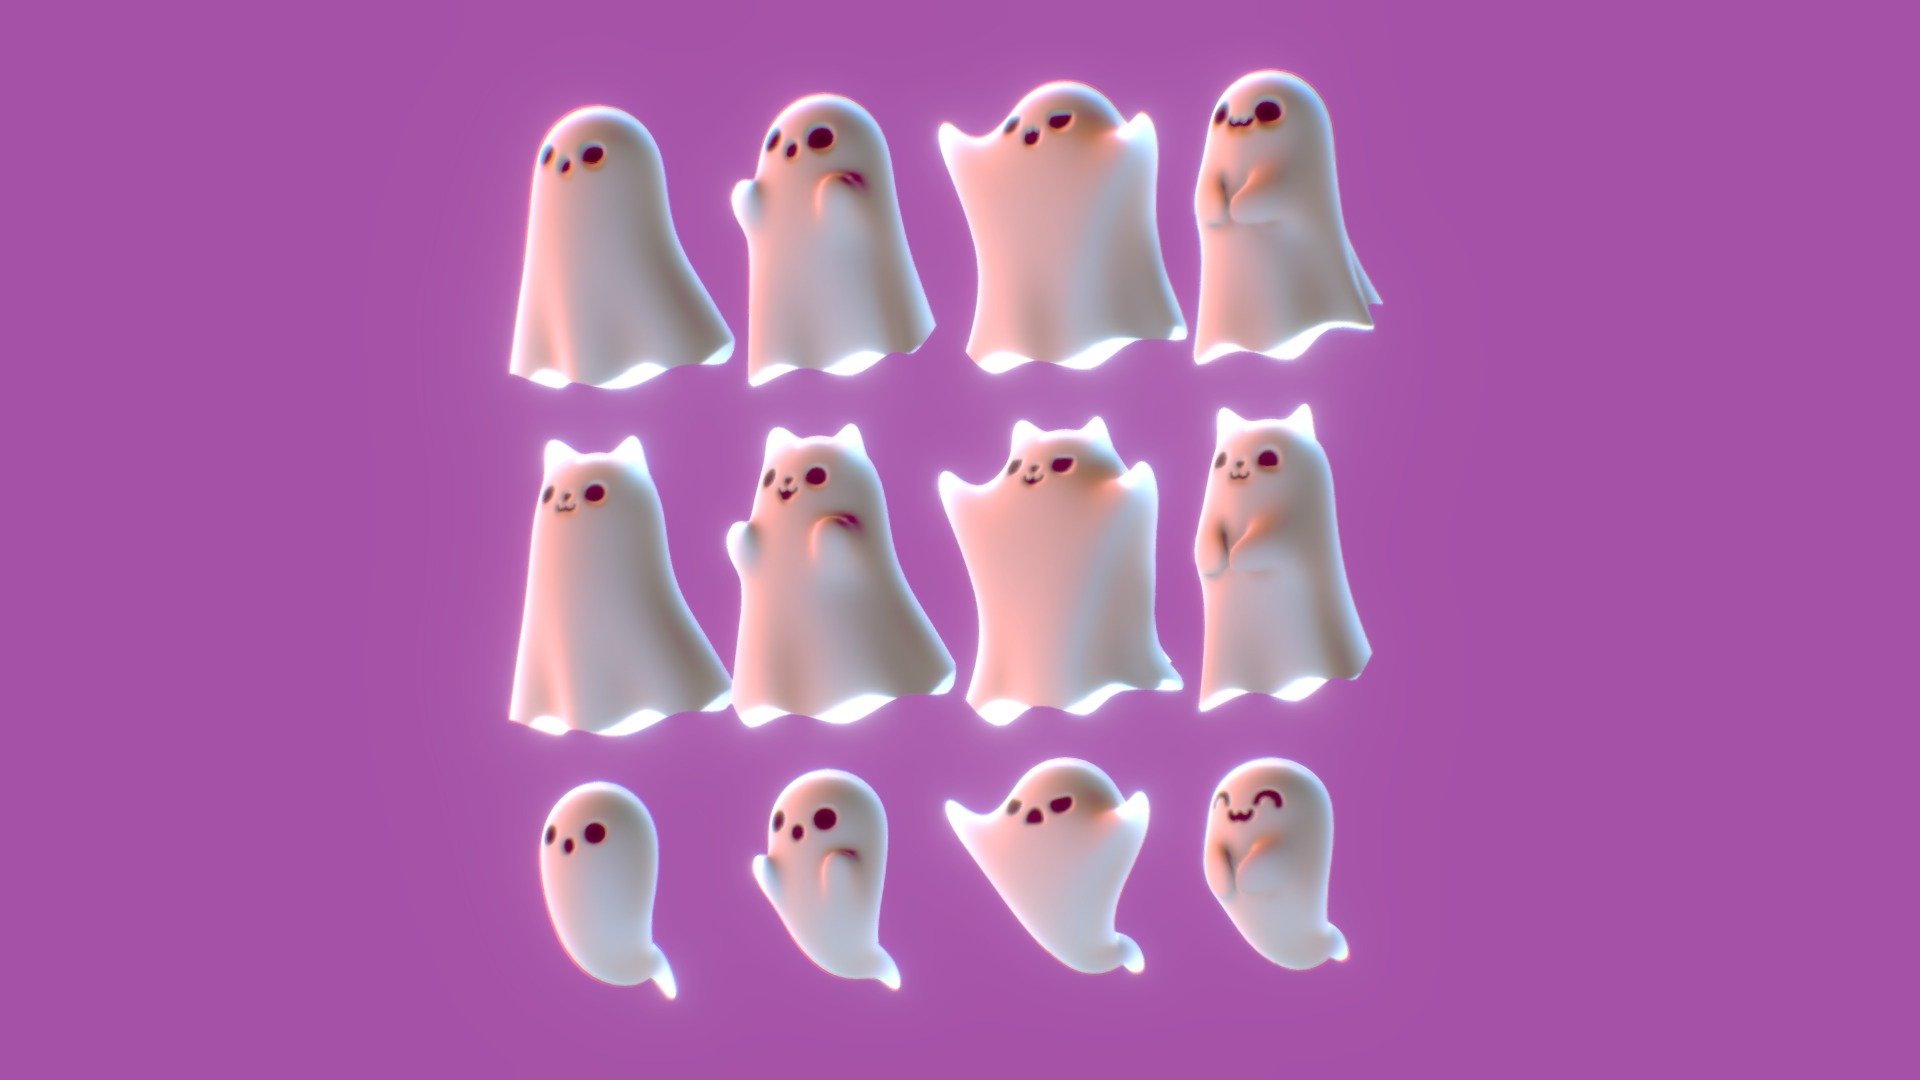 If you post your work on instagram please tag me, I want to see how you use my 3d models&hellip; https://linktr.ee/leoisidro ༼ つ ◕_◕ ༽ つ - GHOST PACK - Buy Royalty Free 3D model by Leo Isidro (@leo.isidro3) 3d model